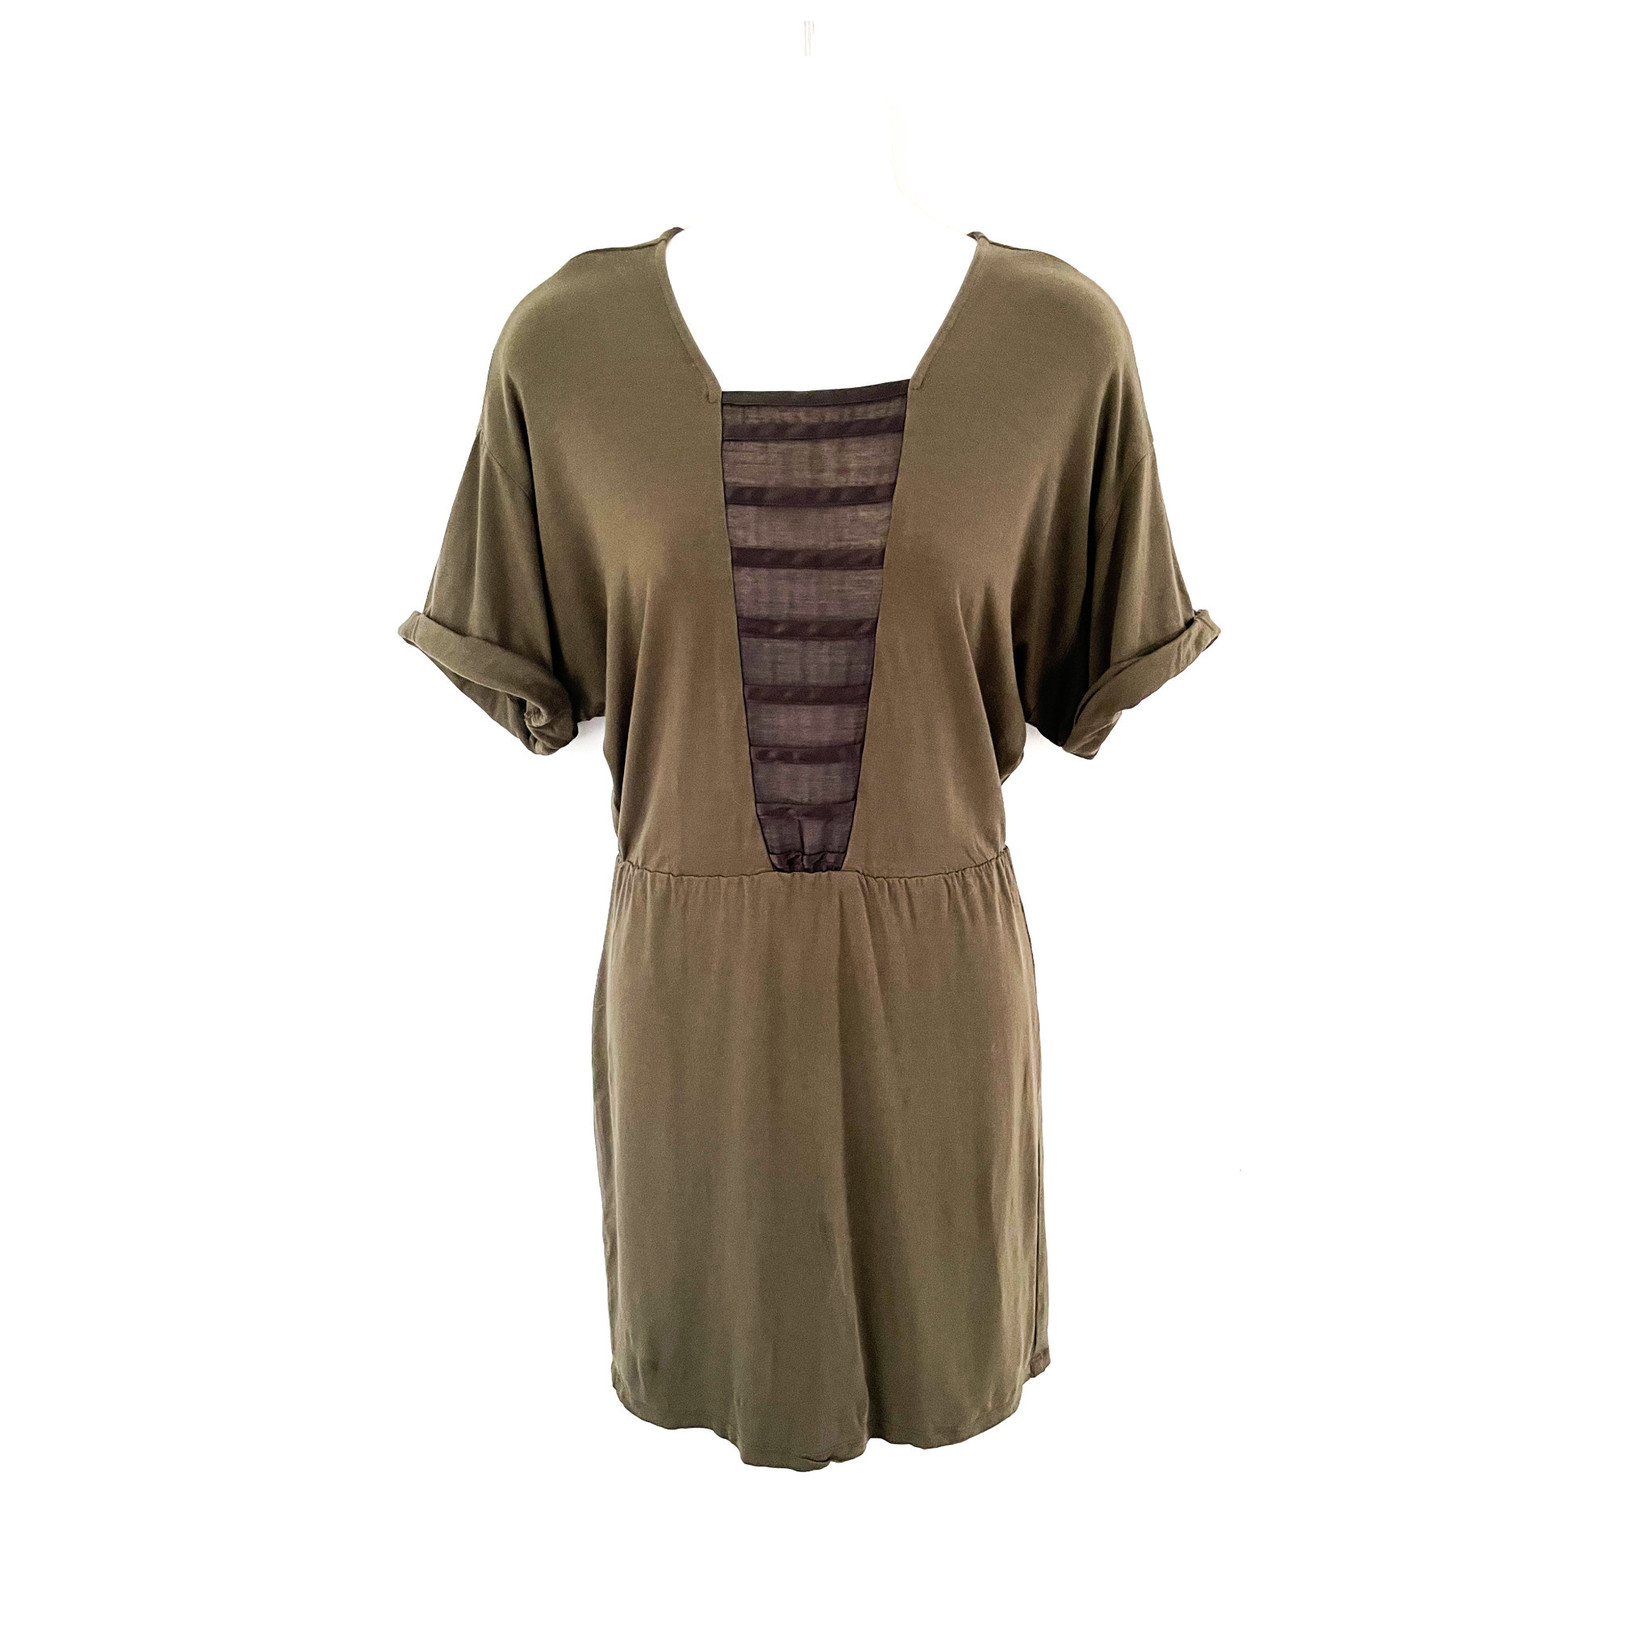 Eve Gravel Eve Gravel Army Green Stretch Dress - Size S